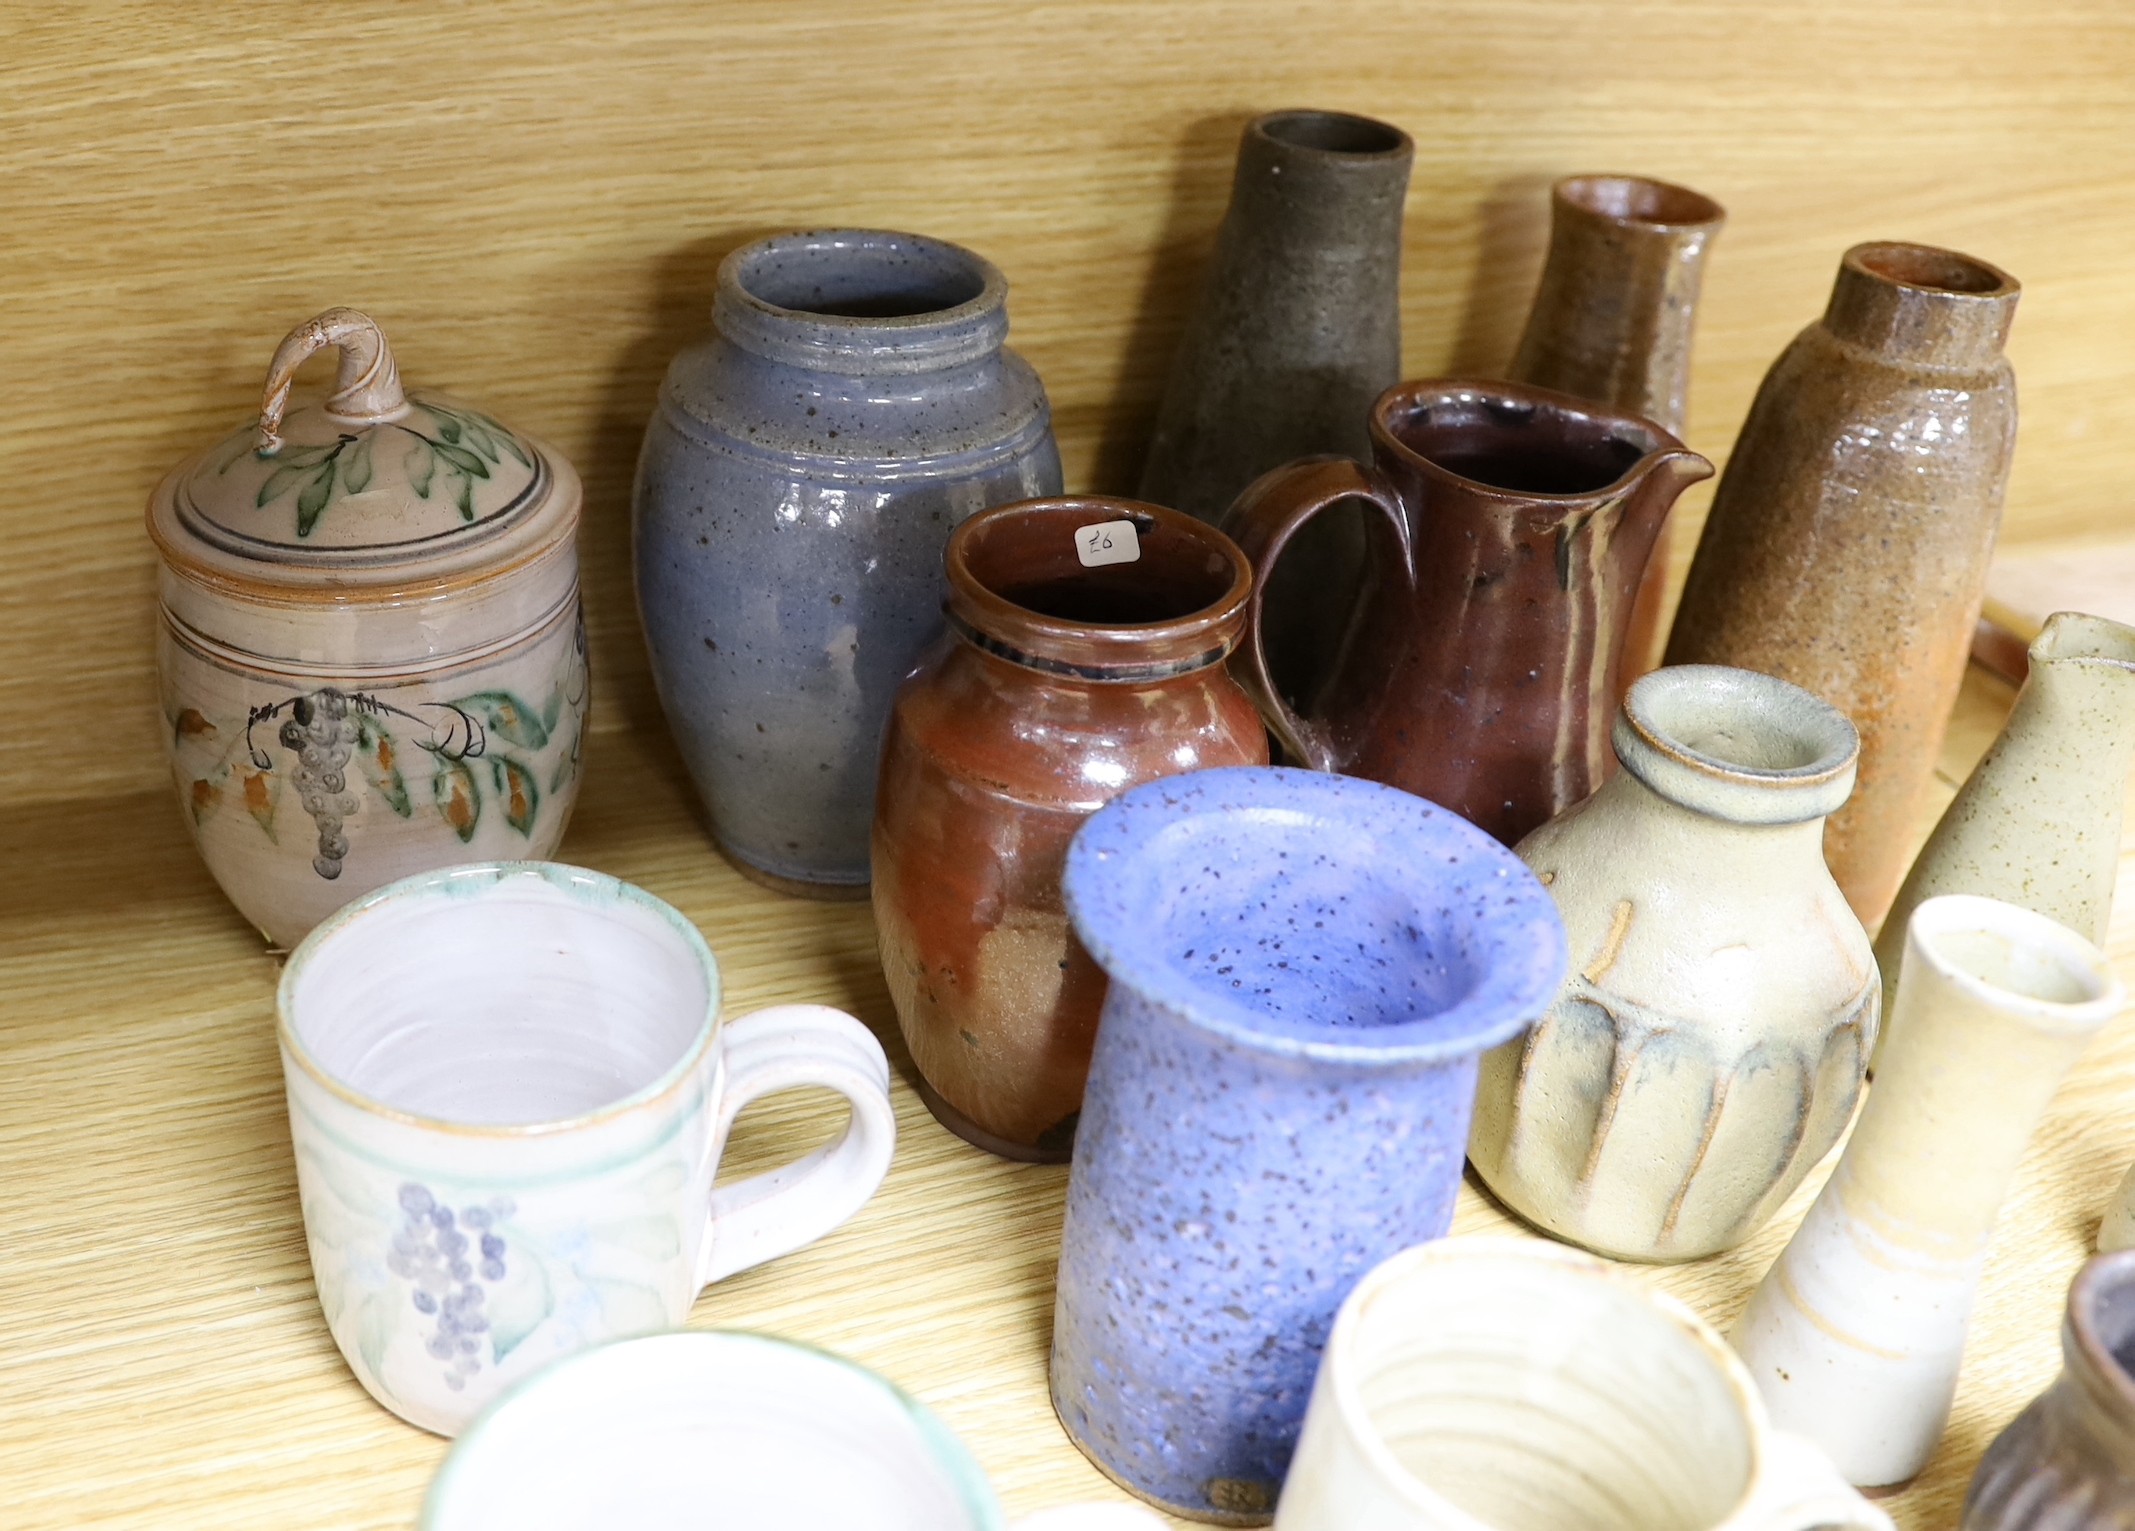 Susan Threadgold - a group of studio pottery small vessels, The tallest is 18 cm (22)